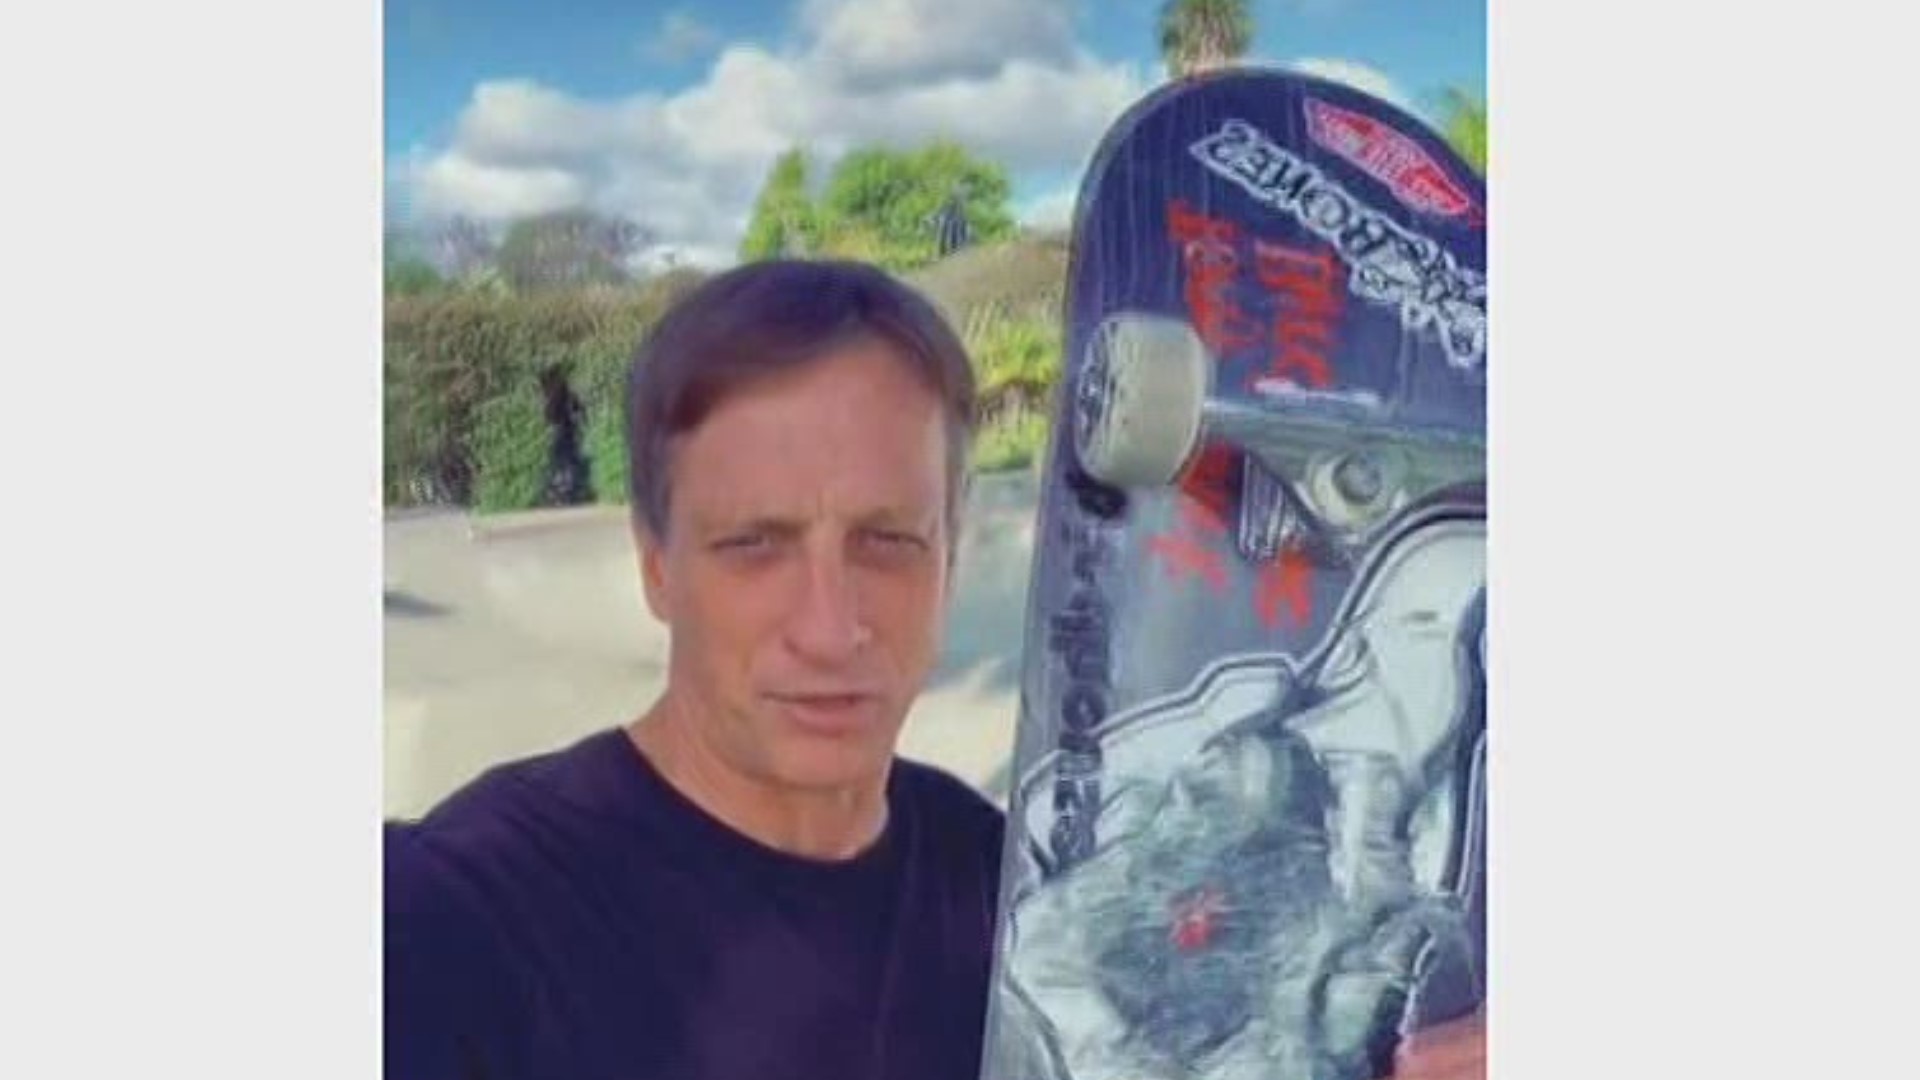 The boy wanted to send a skateboard to Tony Hawk, and social media helped bring it to the legend's attention.